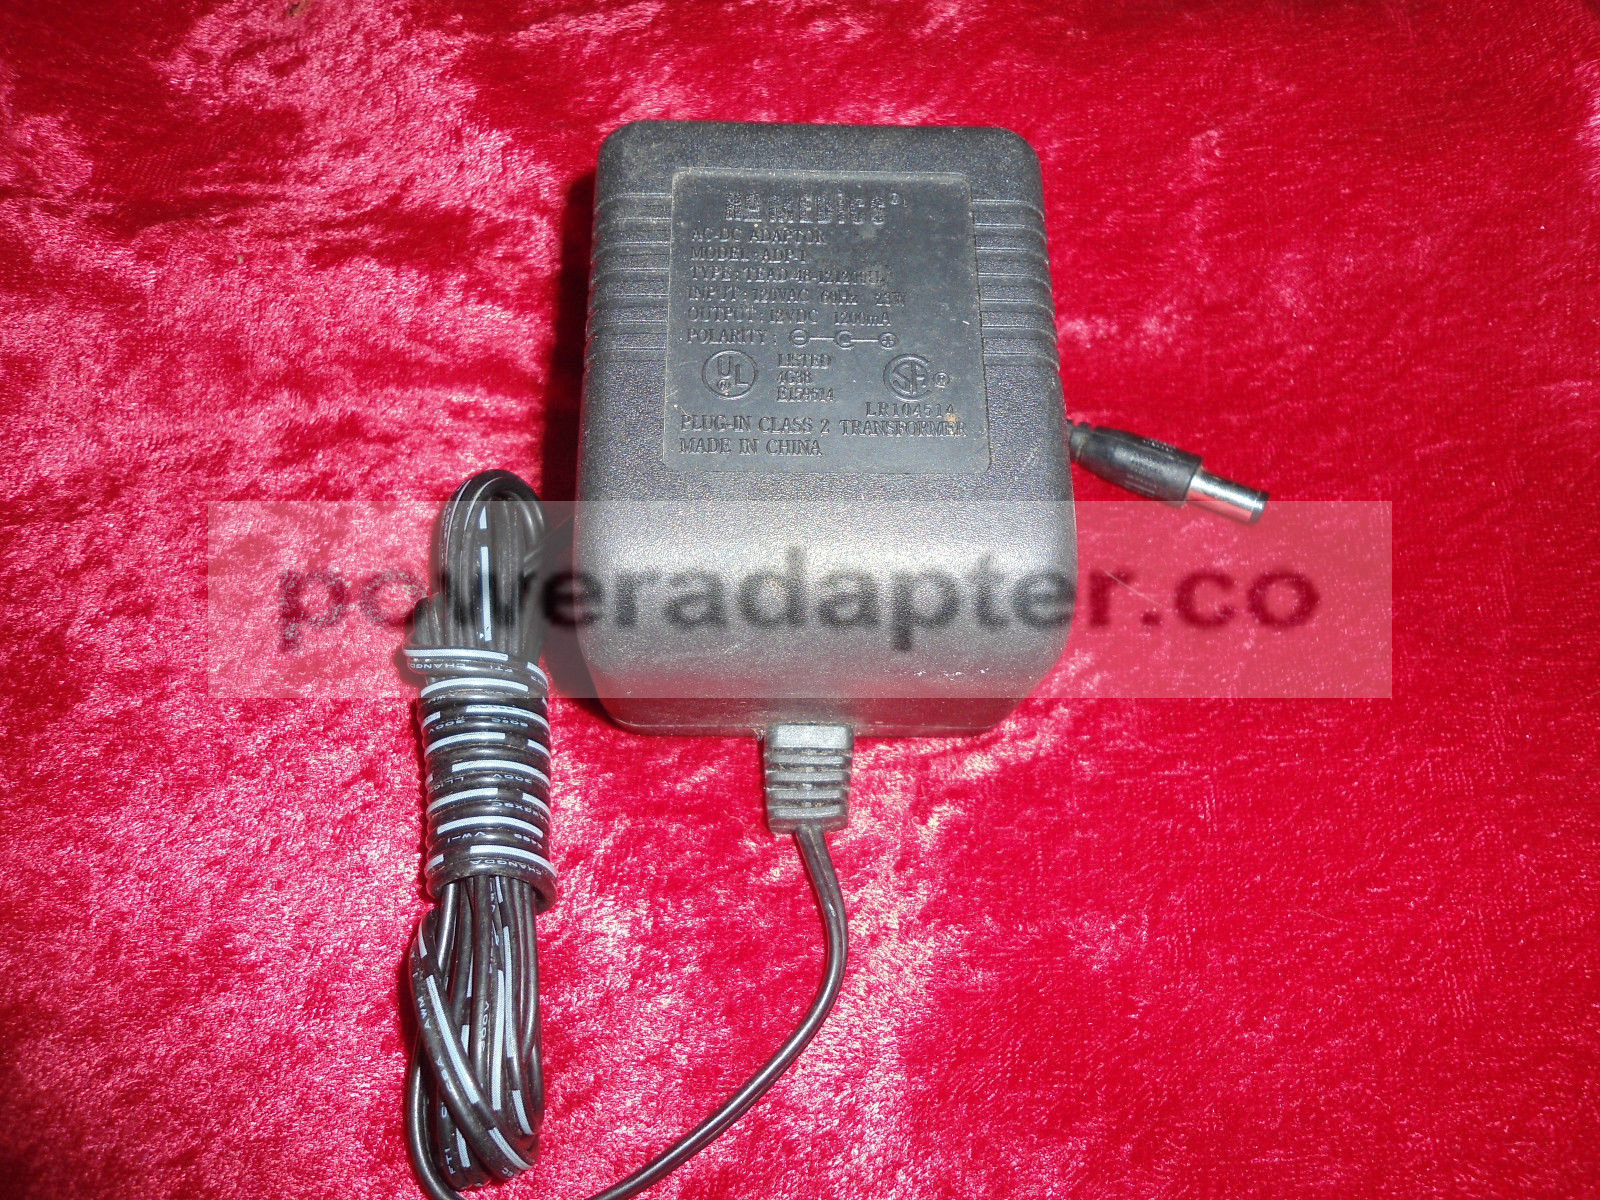 HoMedics AC Adapter ADP-1 / TEAD-48-121200U 12VDC 1200mA Condition: Used: An item that has been used previously. The